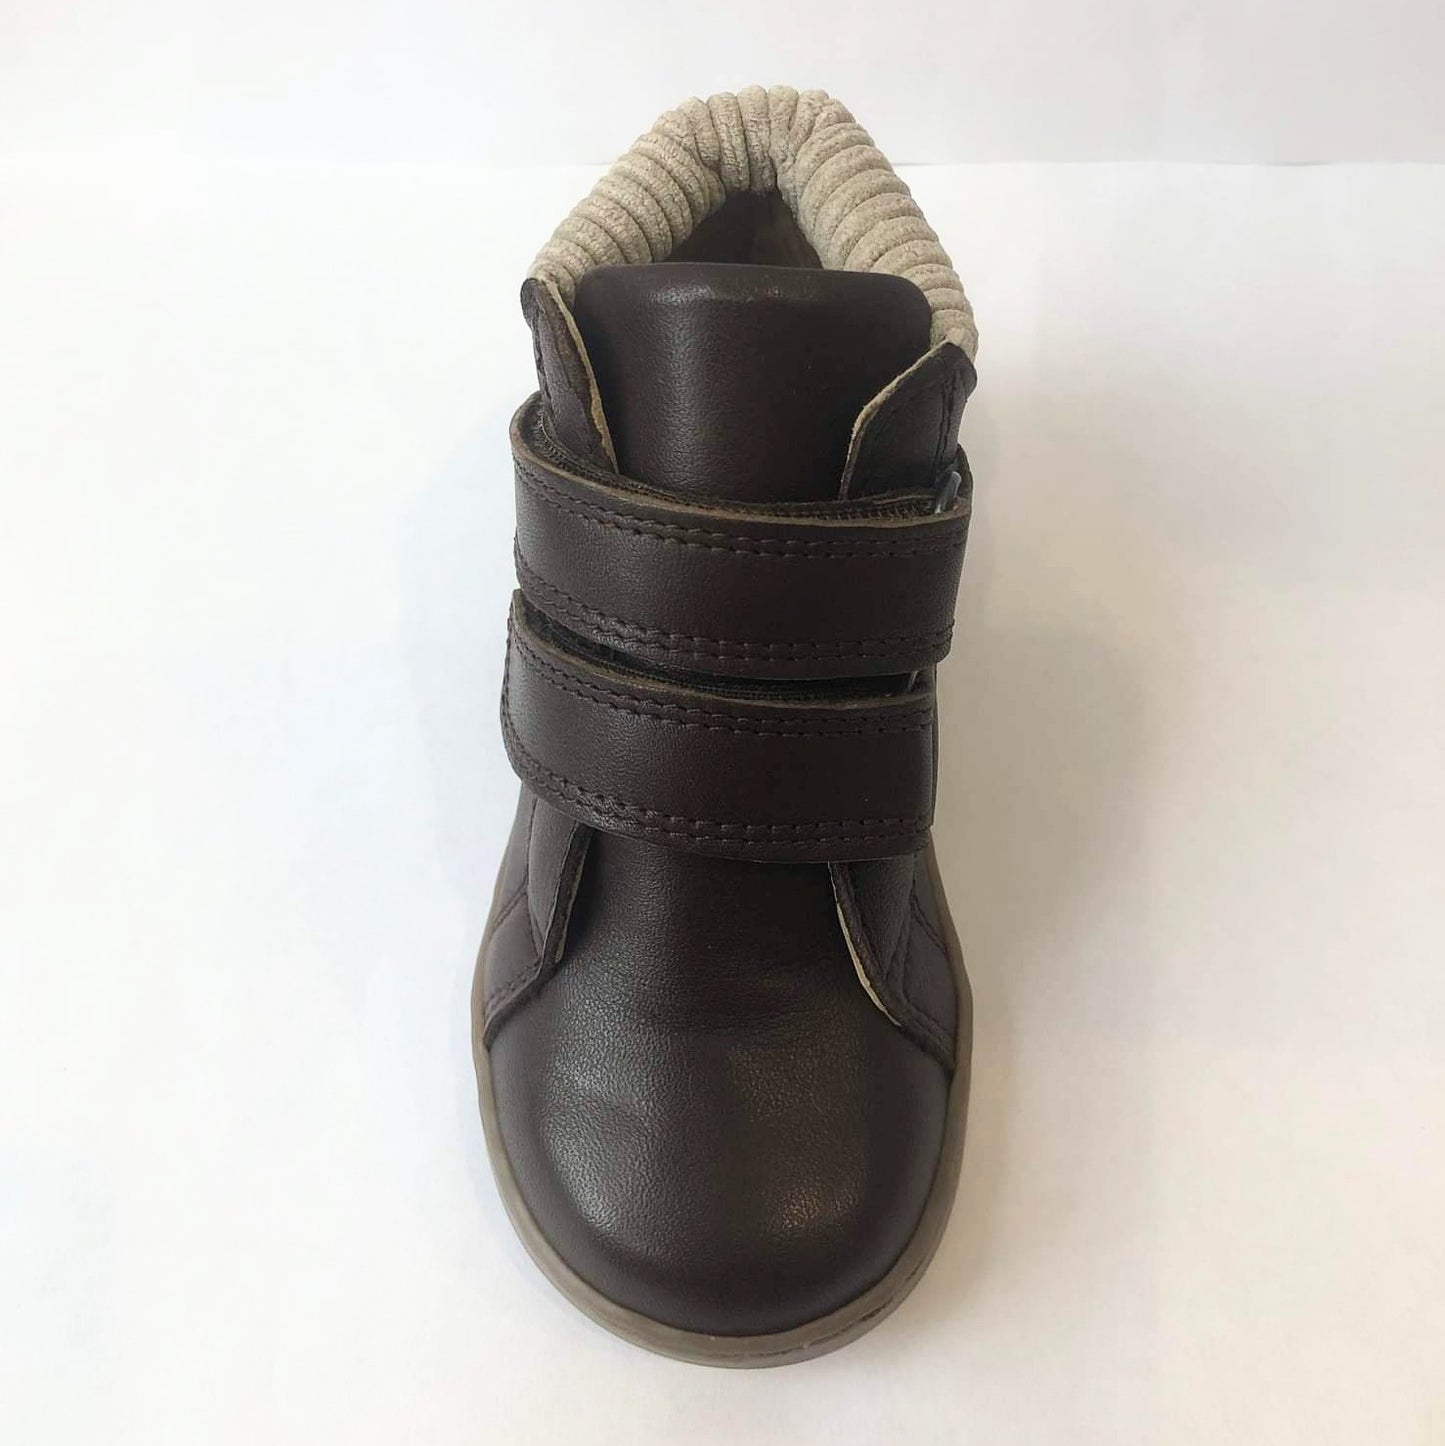 A boys ankle boot by Petasil, style Grange, in Brown leather with double velcro fastening. Top view.